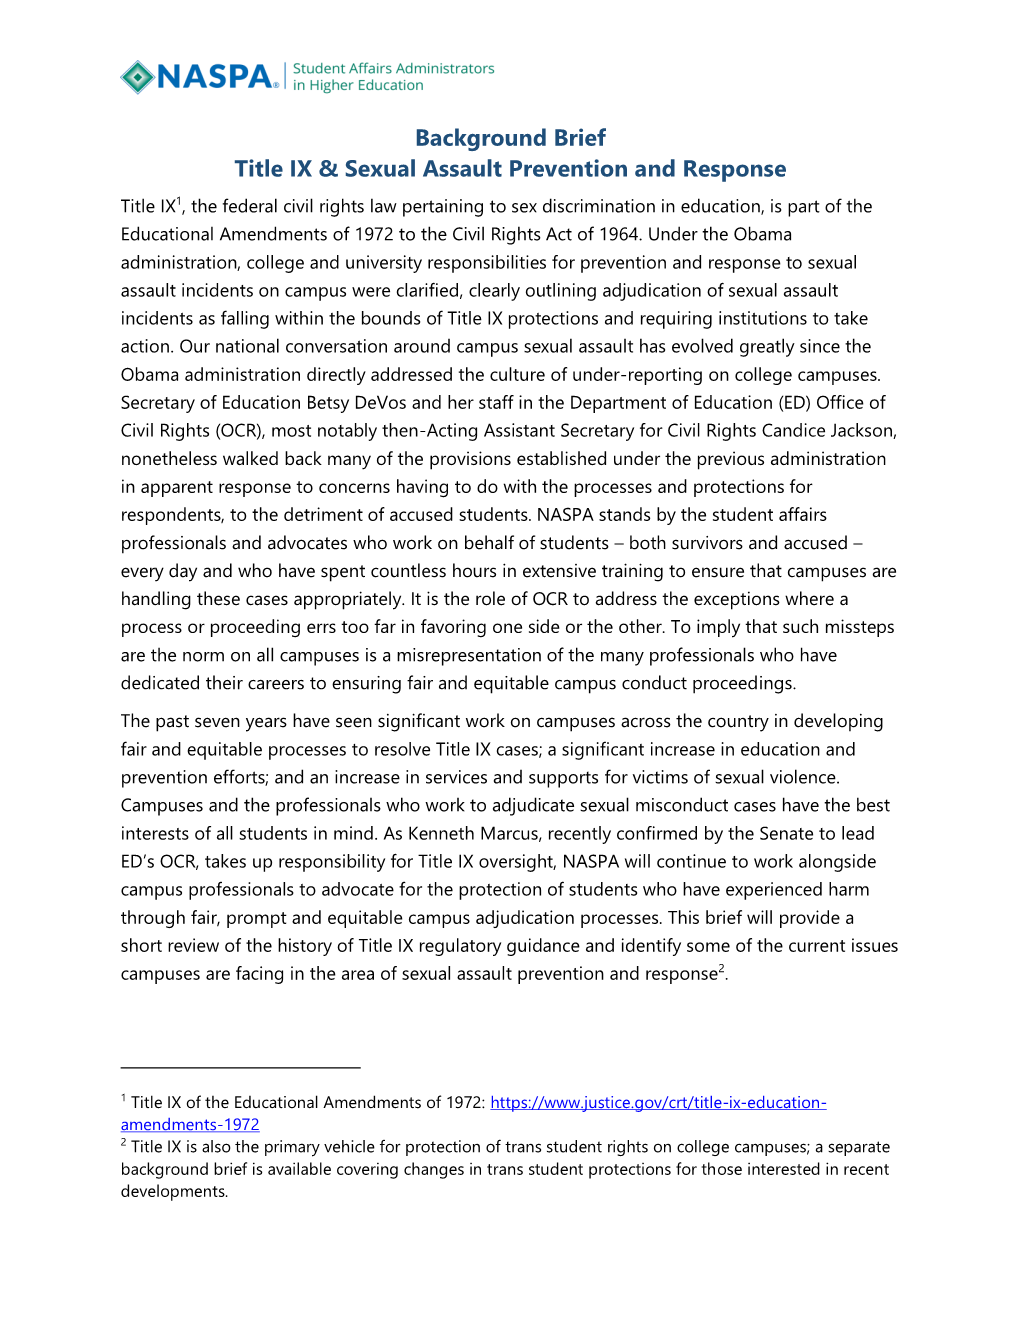 Background Brief Title IX & Sexual Assault Prevention and Response